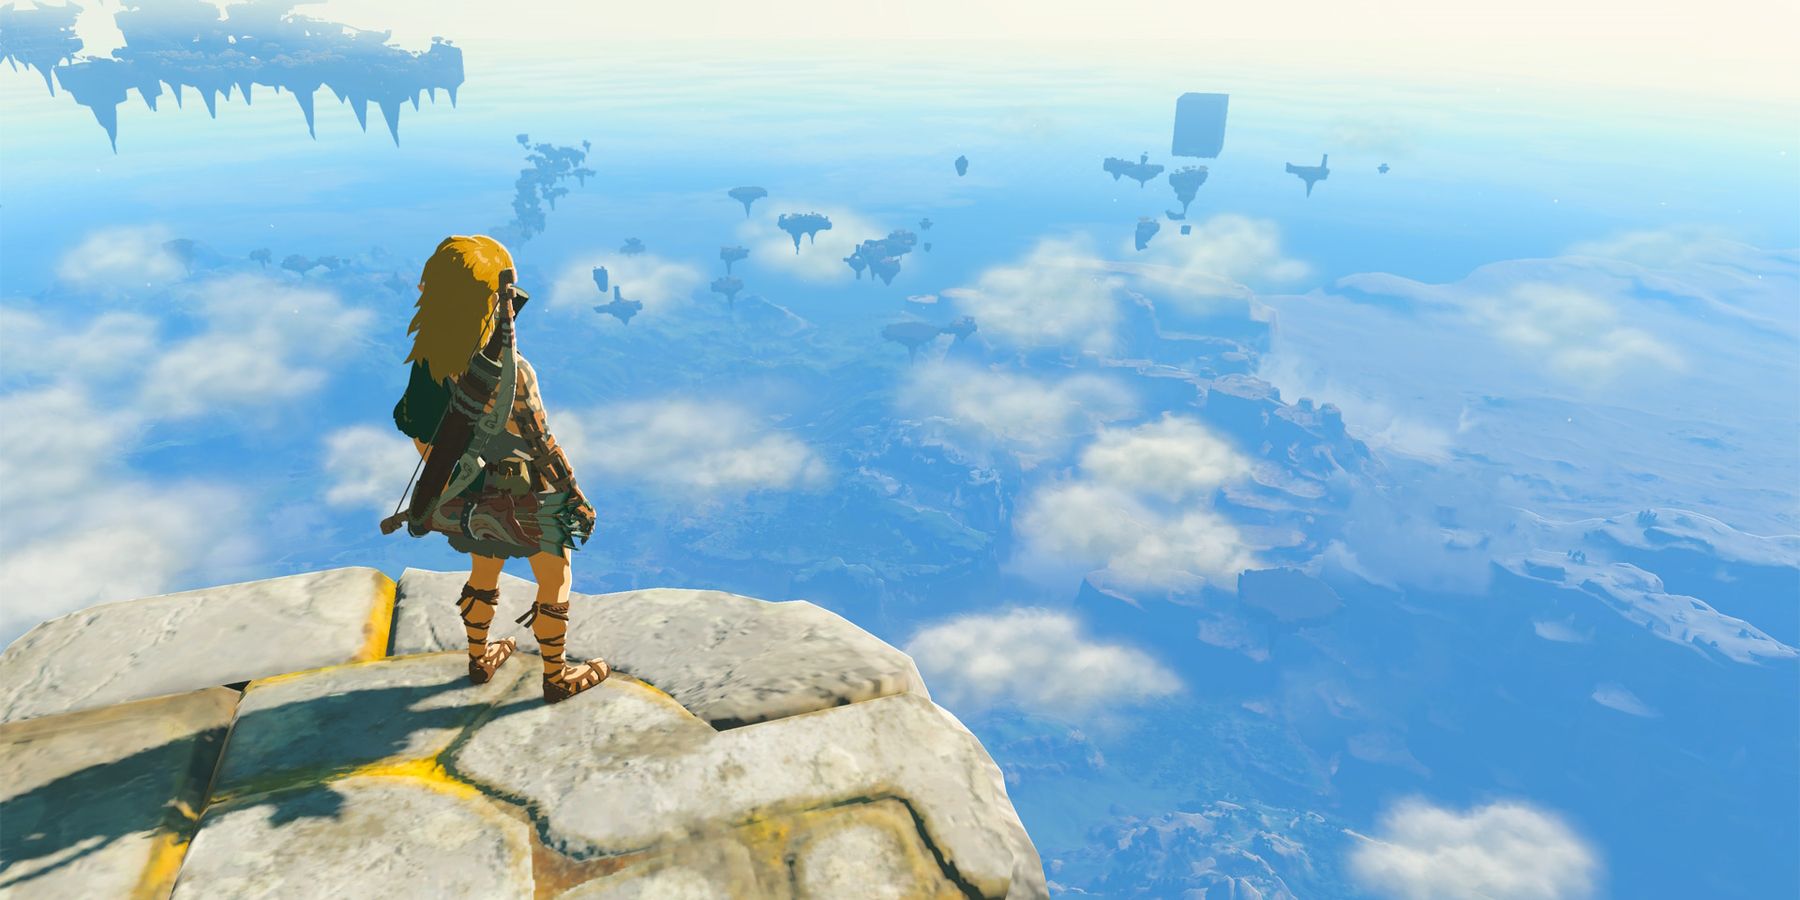 Zelda TOTK Sky Islands, Link with a bow on his back standing on a paved stone surface overlooking some of the sky islands and world down below